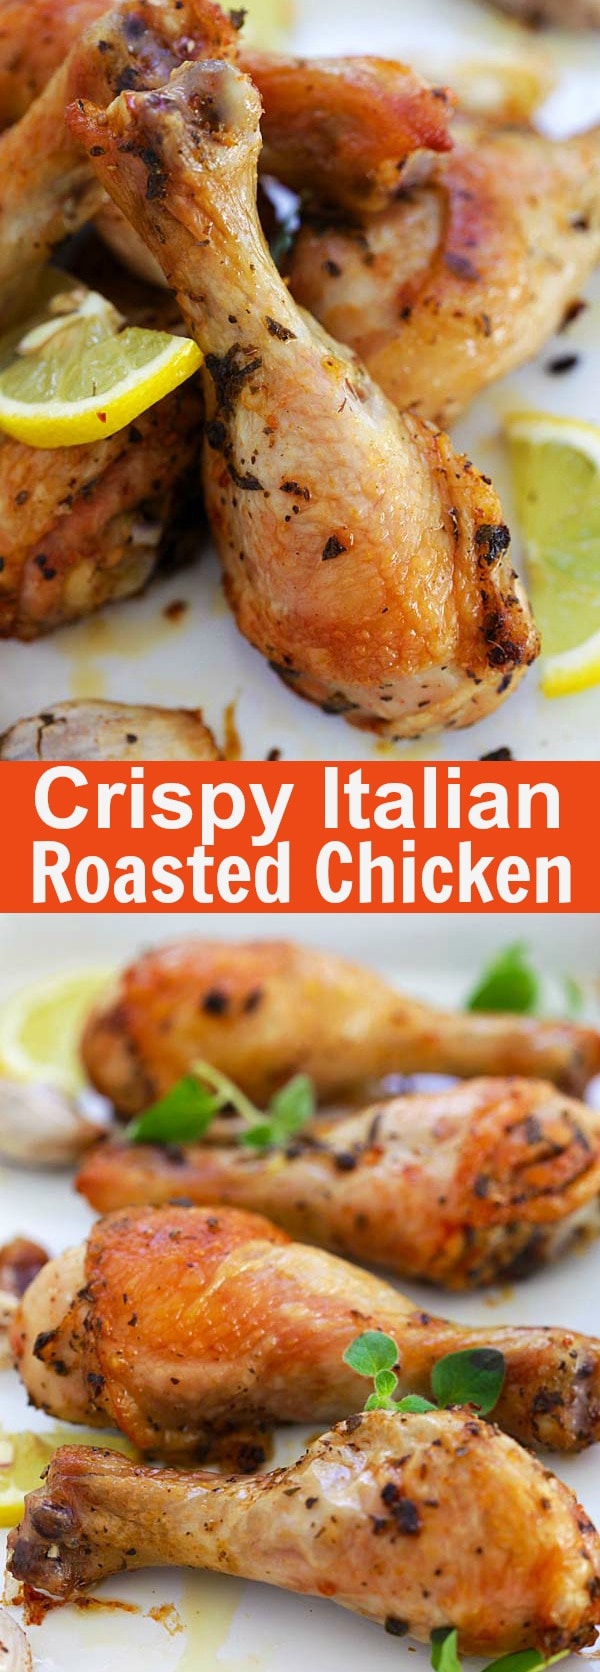 Italian Roasted Chicken - roasted chicken drumsticks marinated with Italian herbs and seasonings. Crispy, delicious and so easy to make | rasamalaysia.com